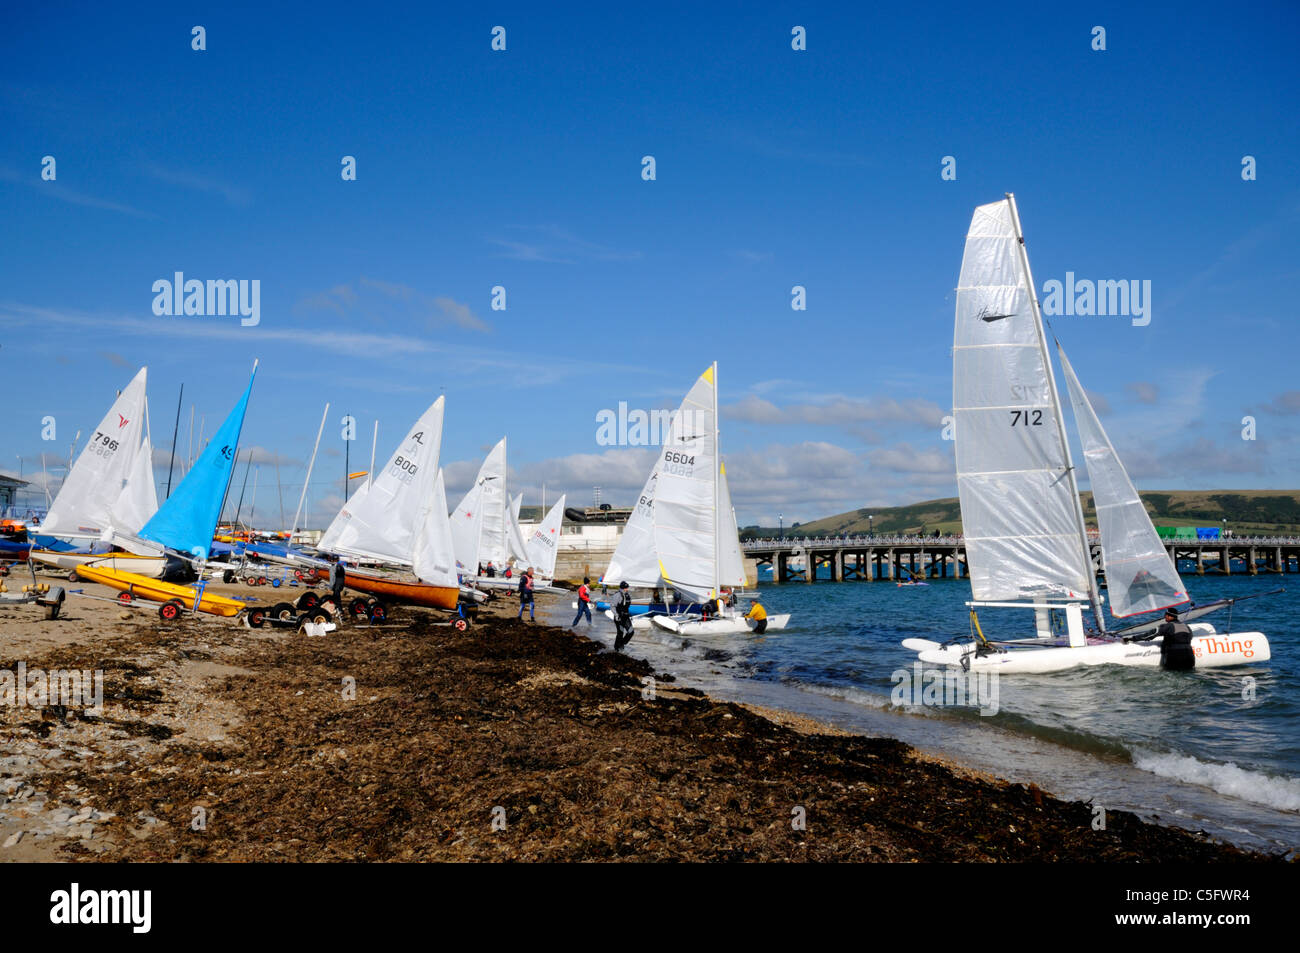 Sailing Boats at Swanage in Dorset, England. Stock Photo